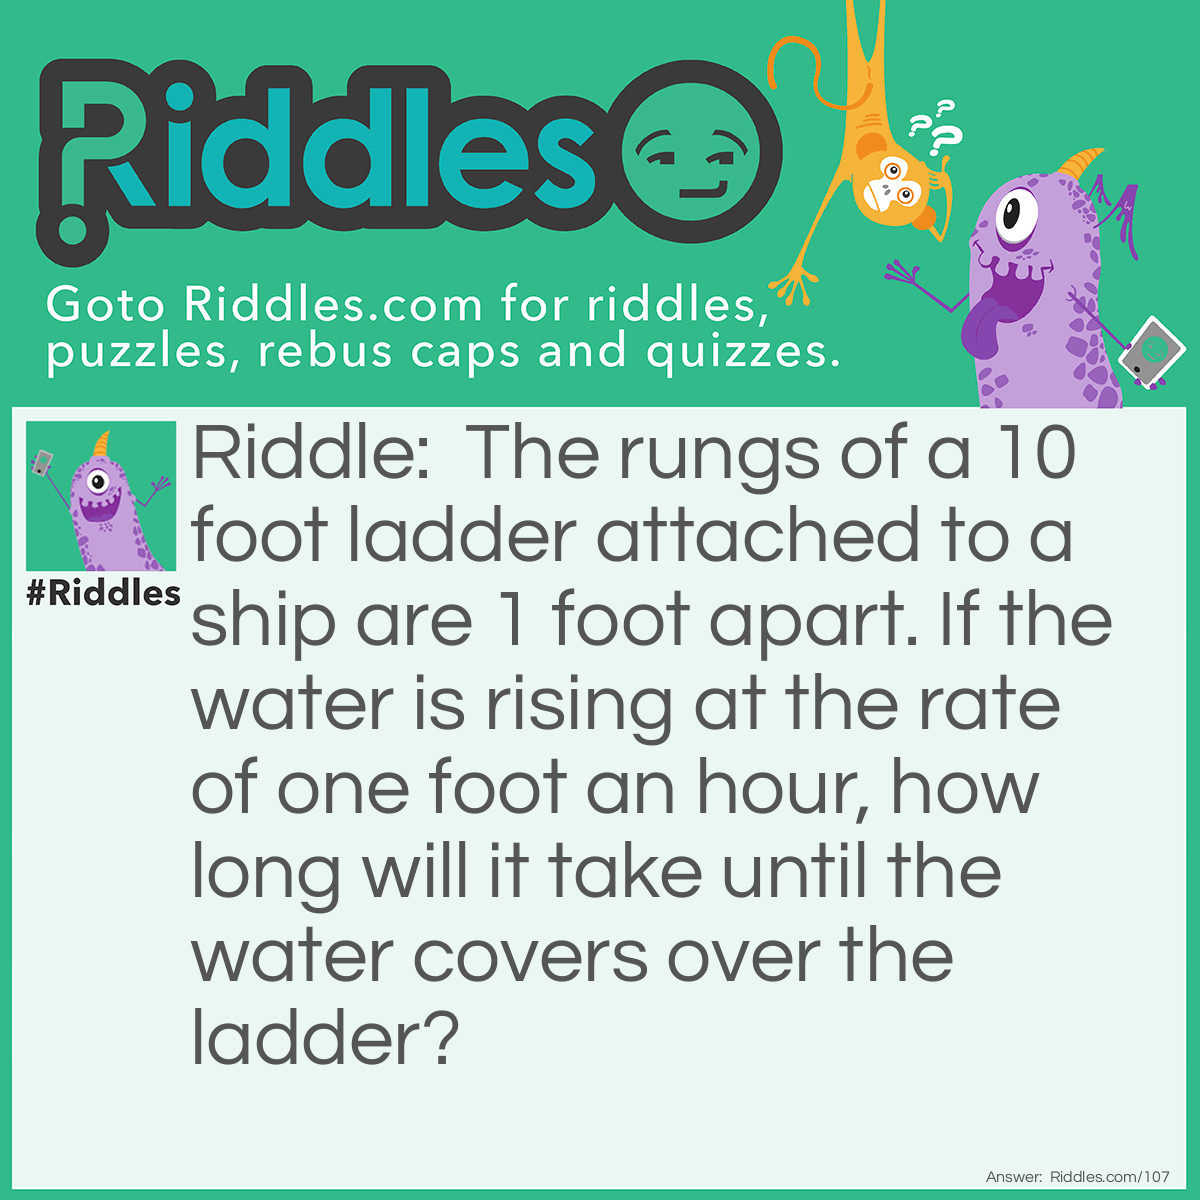 Riddle: The rungs of a 10 foot ladder attached to a ship are 1 foot apart. If the water is rising at the rate of one foot an hour, how long will it take until the water covers over the ladder? Answer: It will never cover the ladder because as the water rises, so will the floating ship.